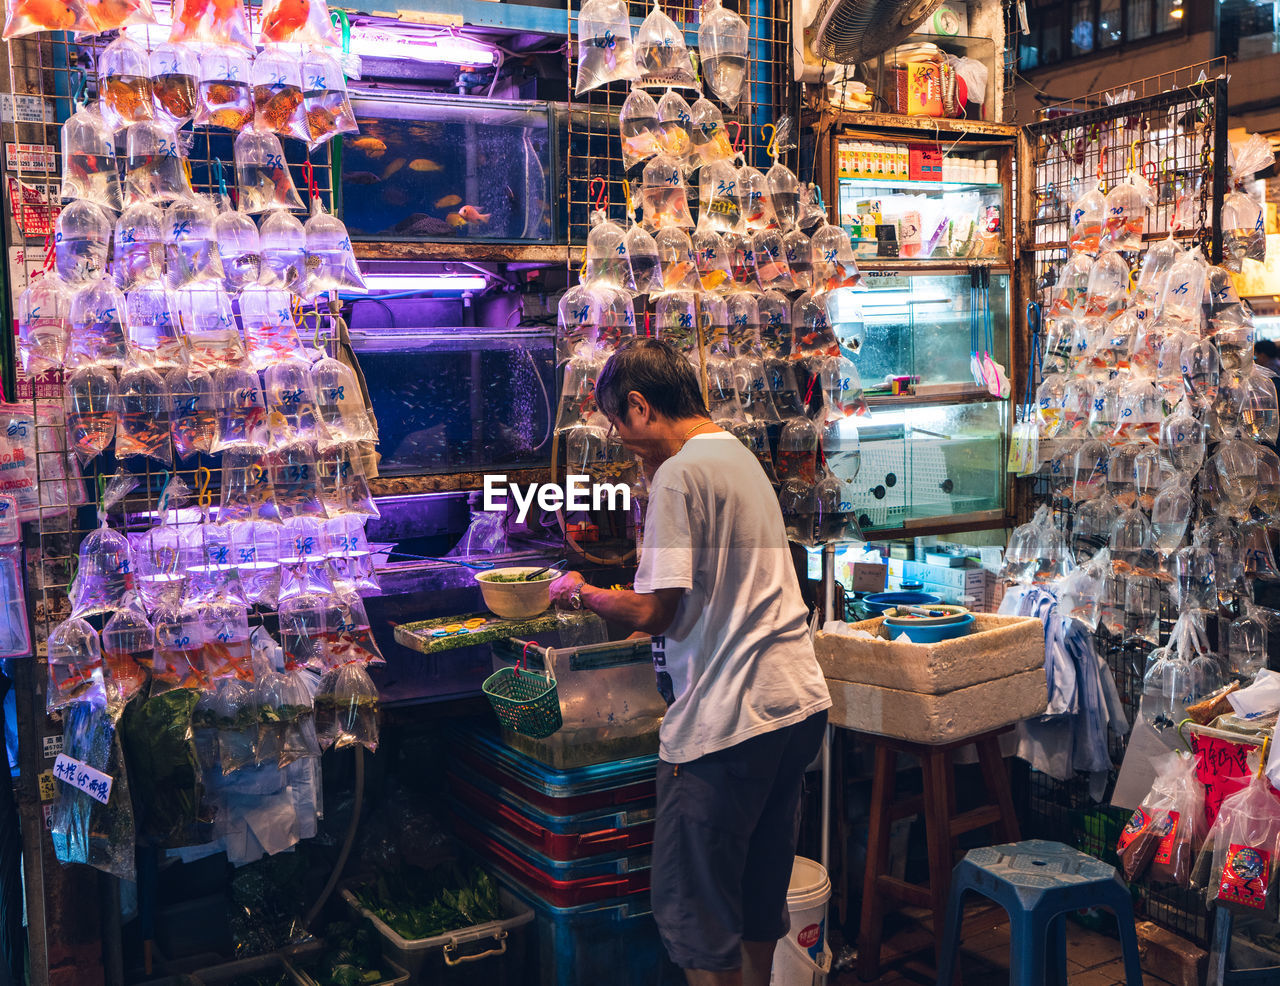 MAN STANDING IN MARKET STALL